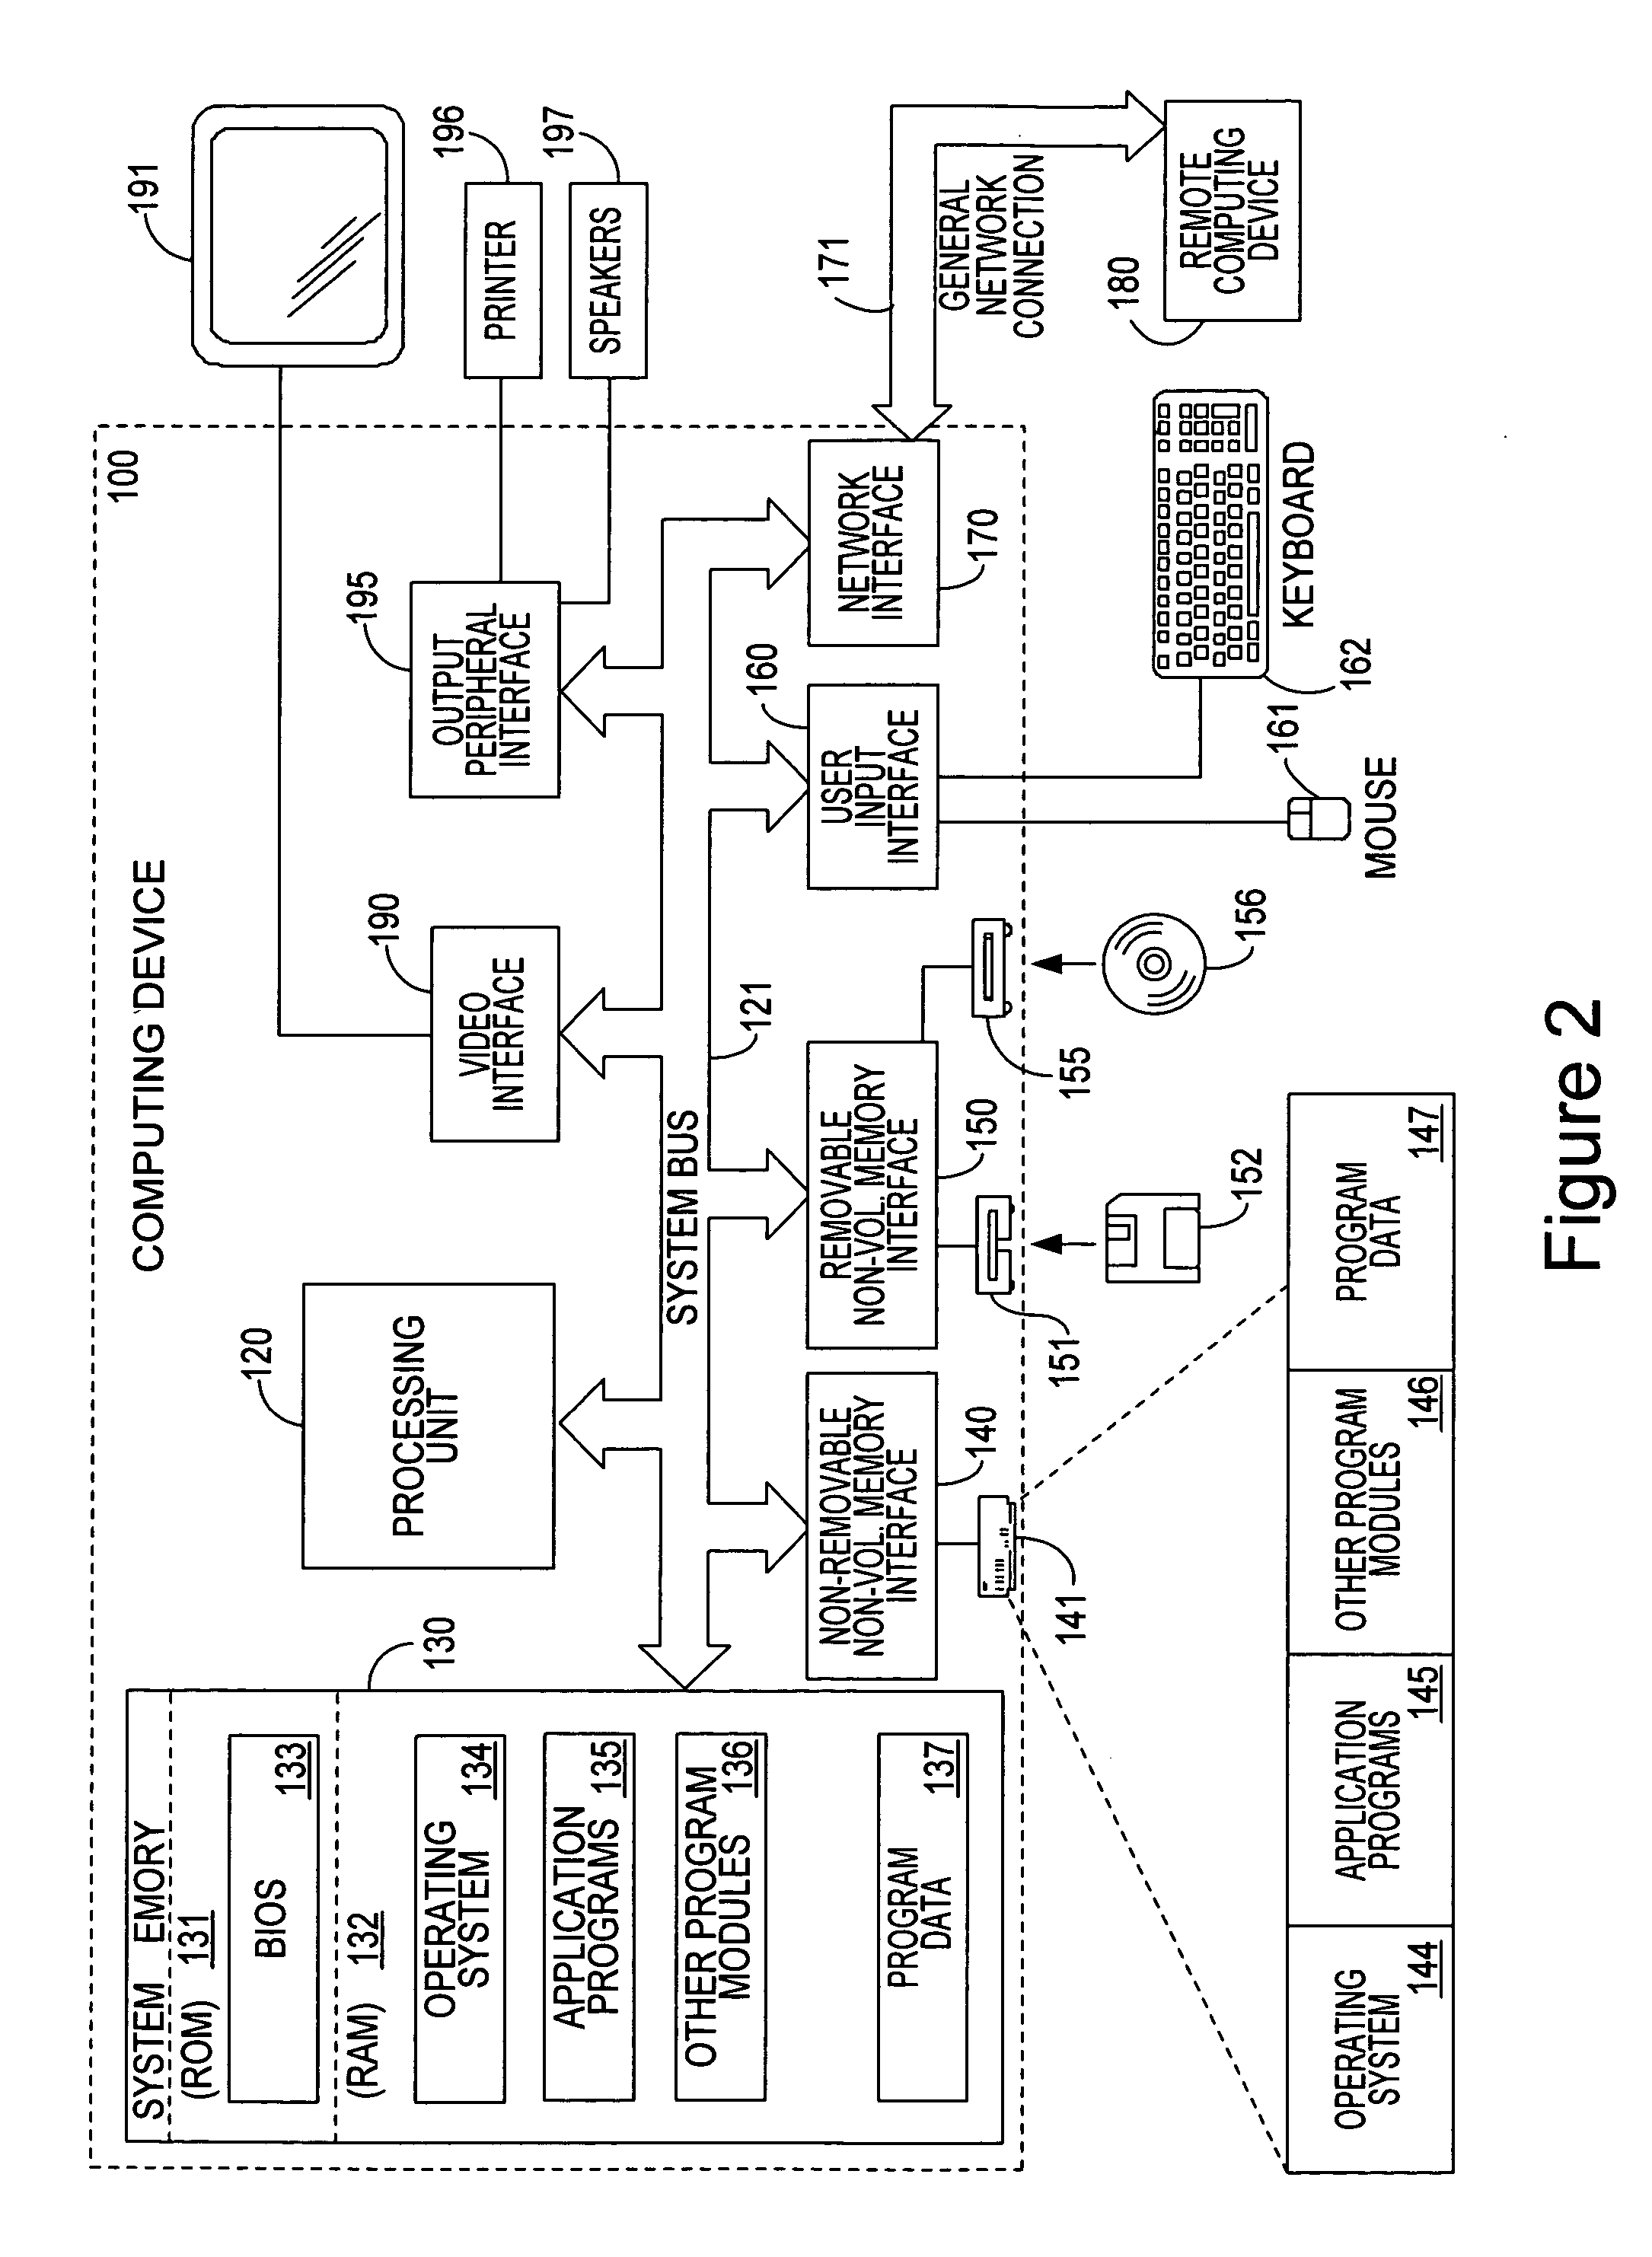 Efficient changing of replica sets in distributed fault-tolerant computing system